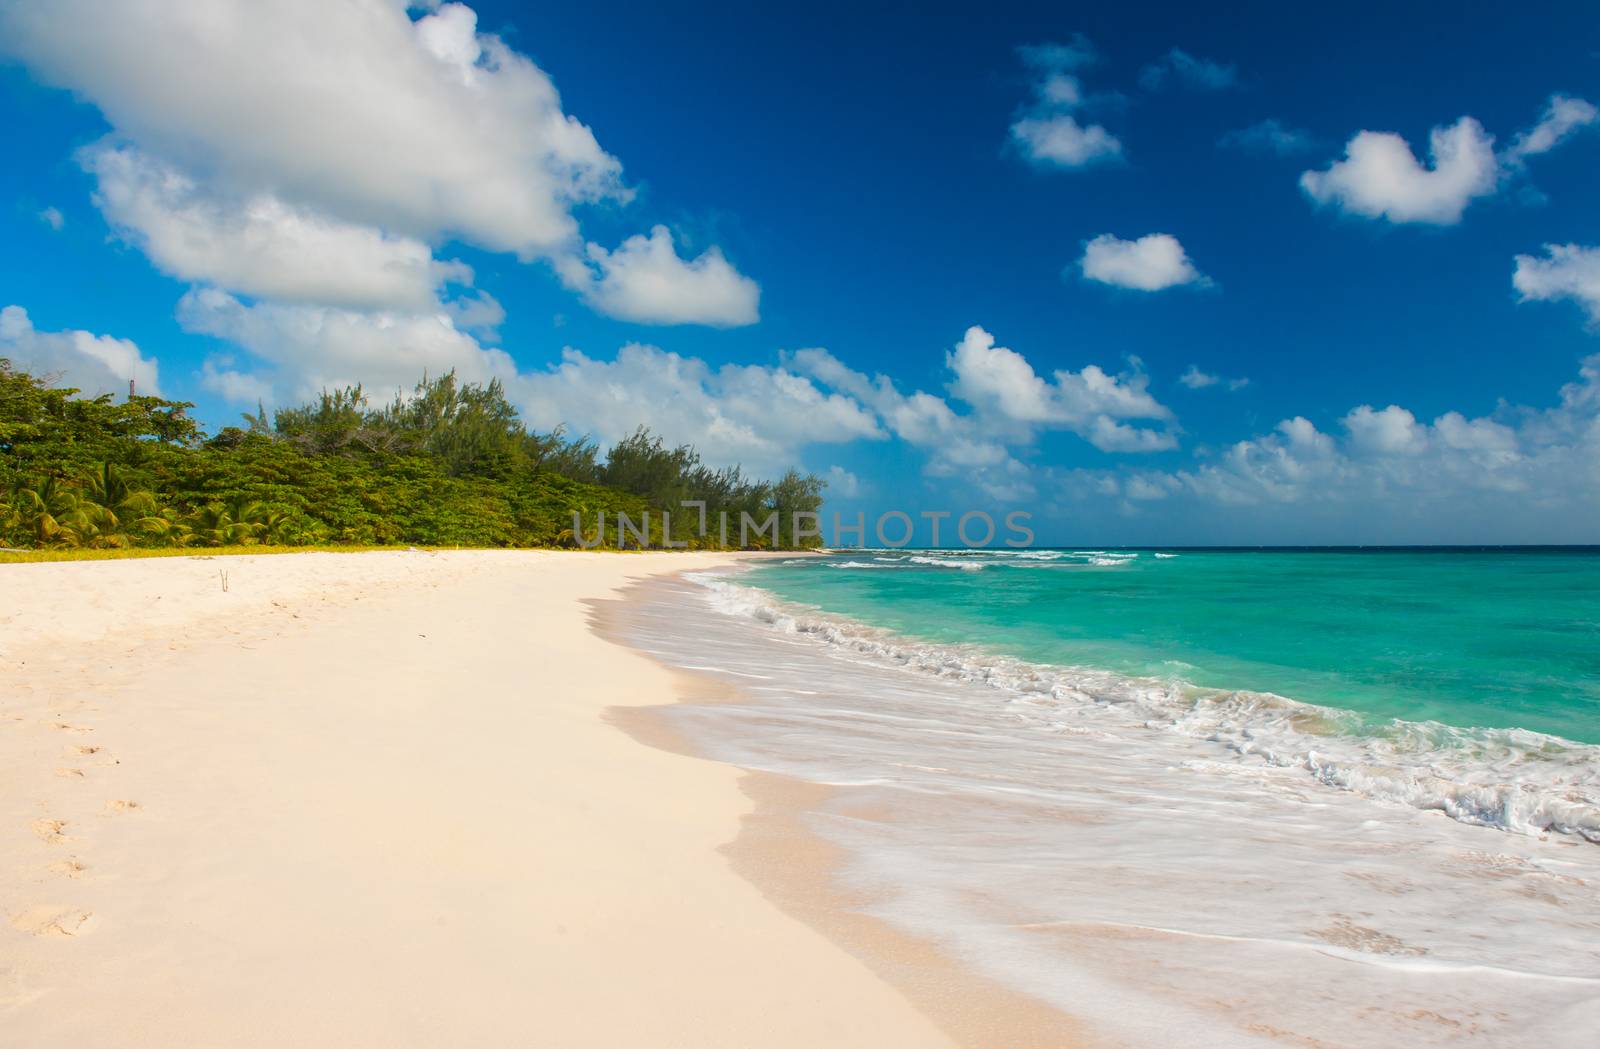 Drill Beach is a beautiful beaches on the Caribbean island of Barbados